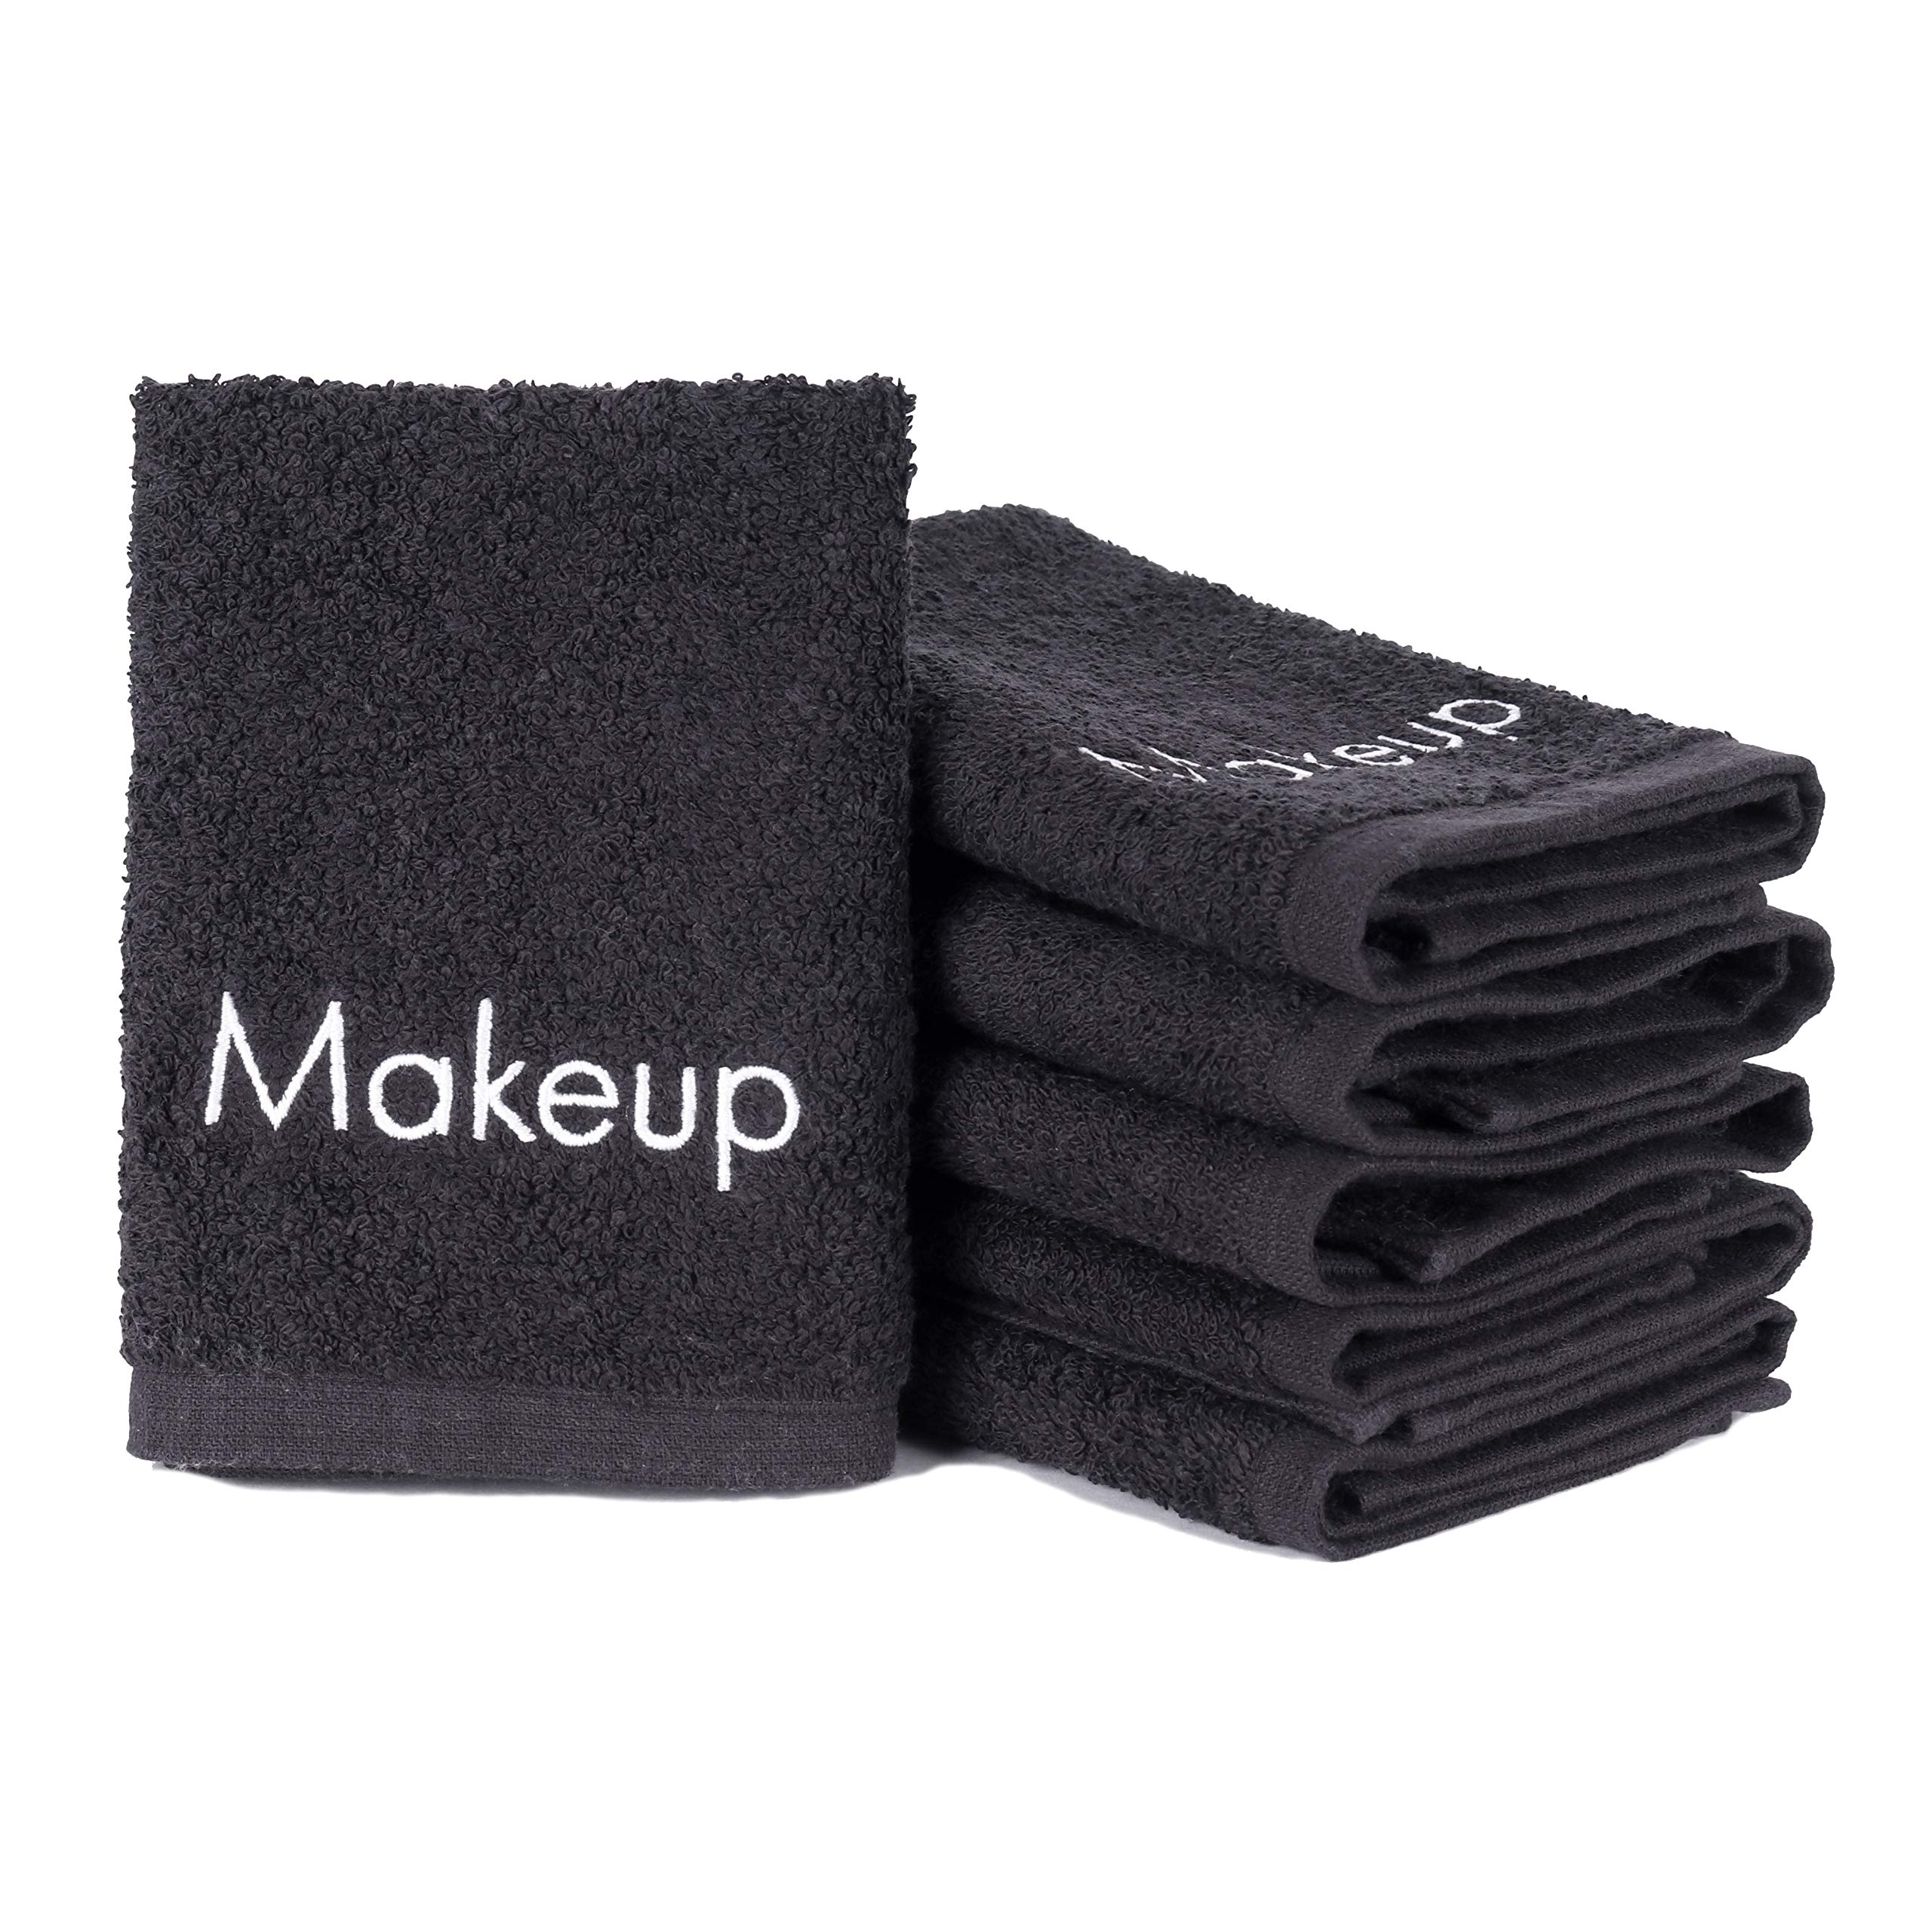 Bleach Safe Black Makeup Towels | Luxury Ultra Soft Cotton Face Washcloths Make Up Removal | 6 Pack, Size: 13 x 13